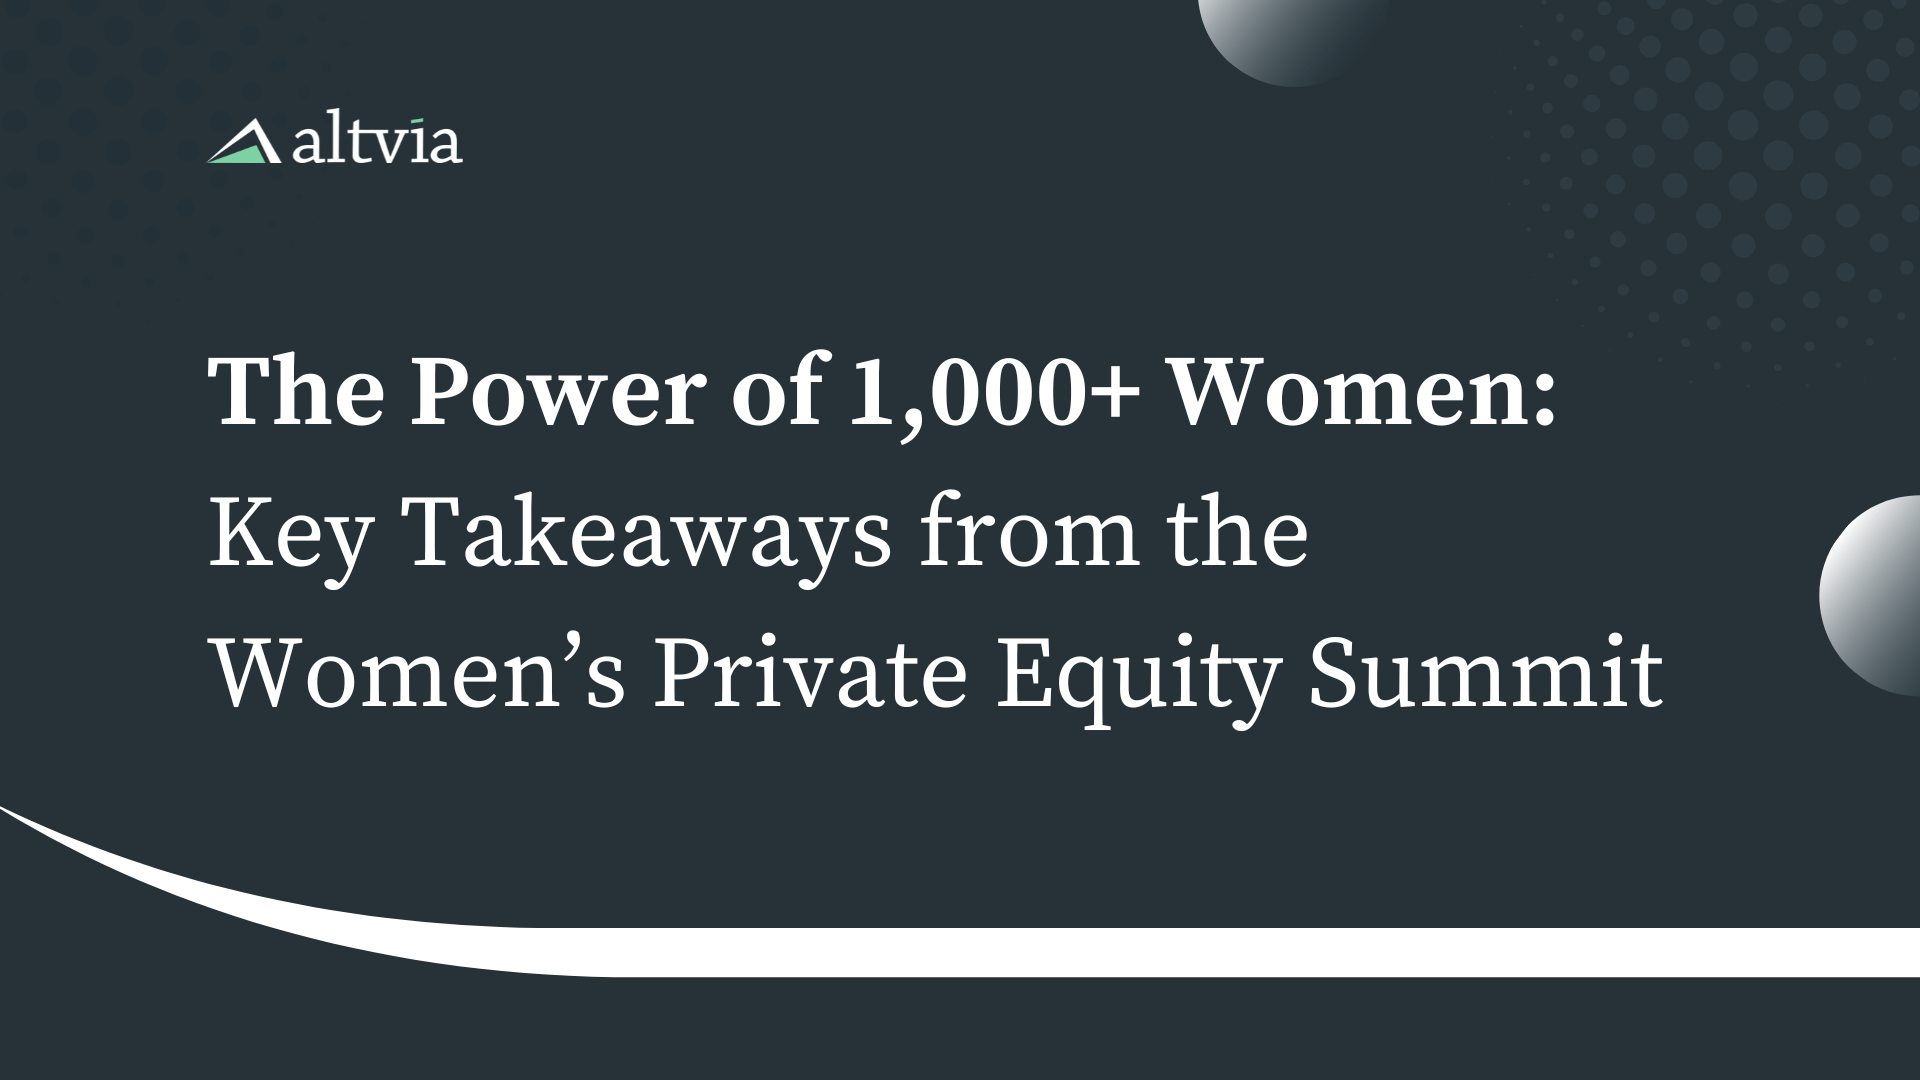 The Power of 1,000+ Women: Key Takeaways from the Women’s Private Equity Summit